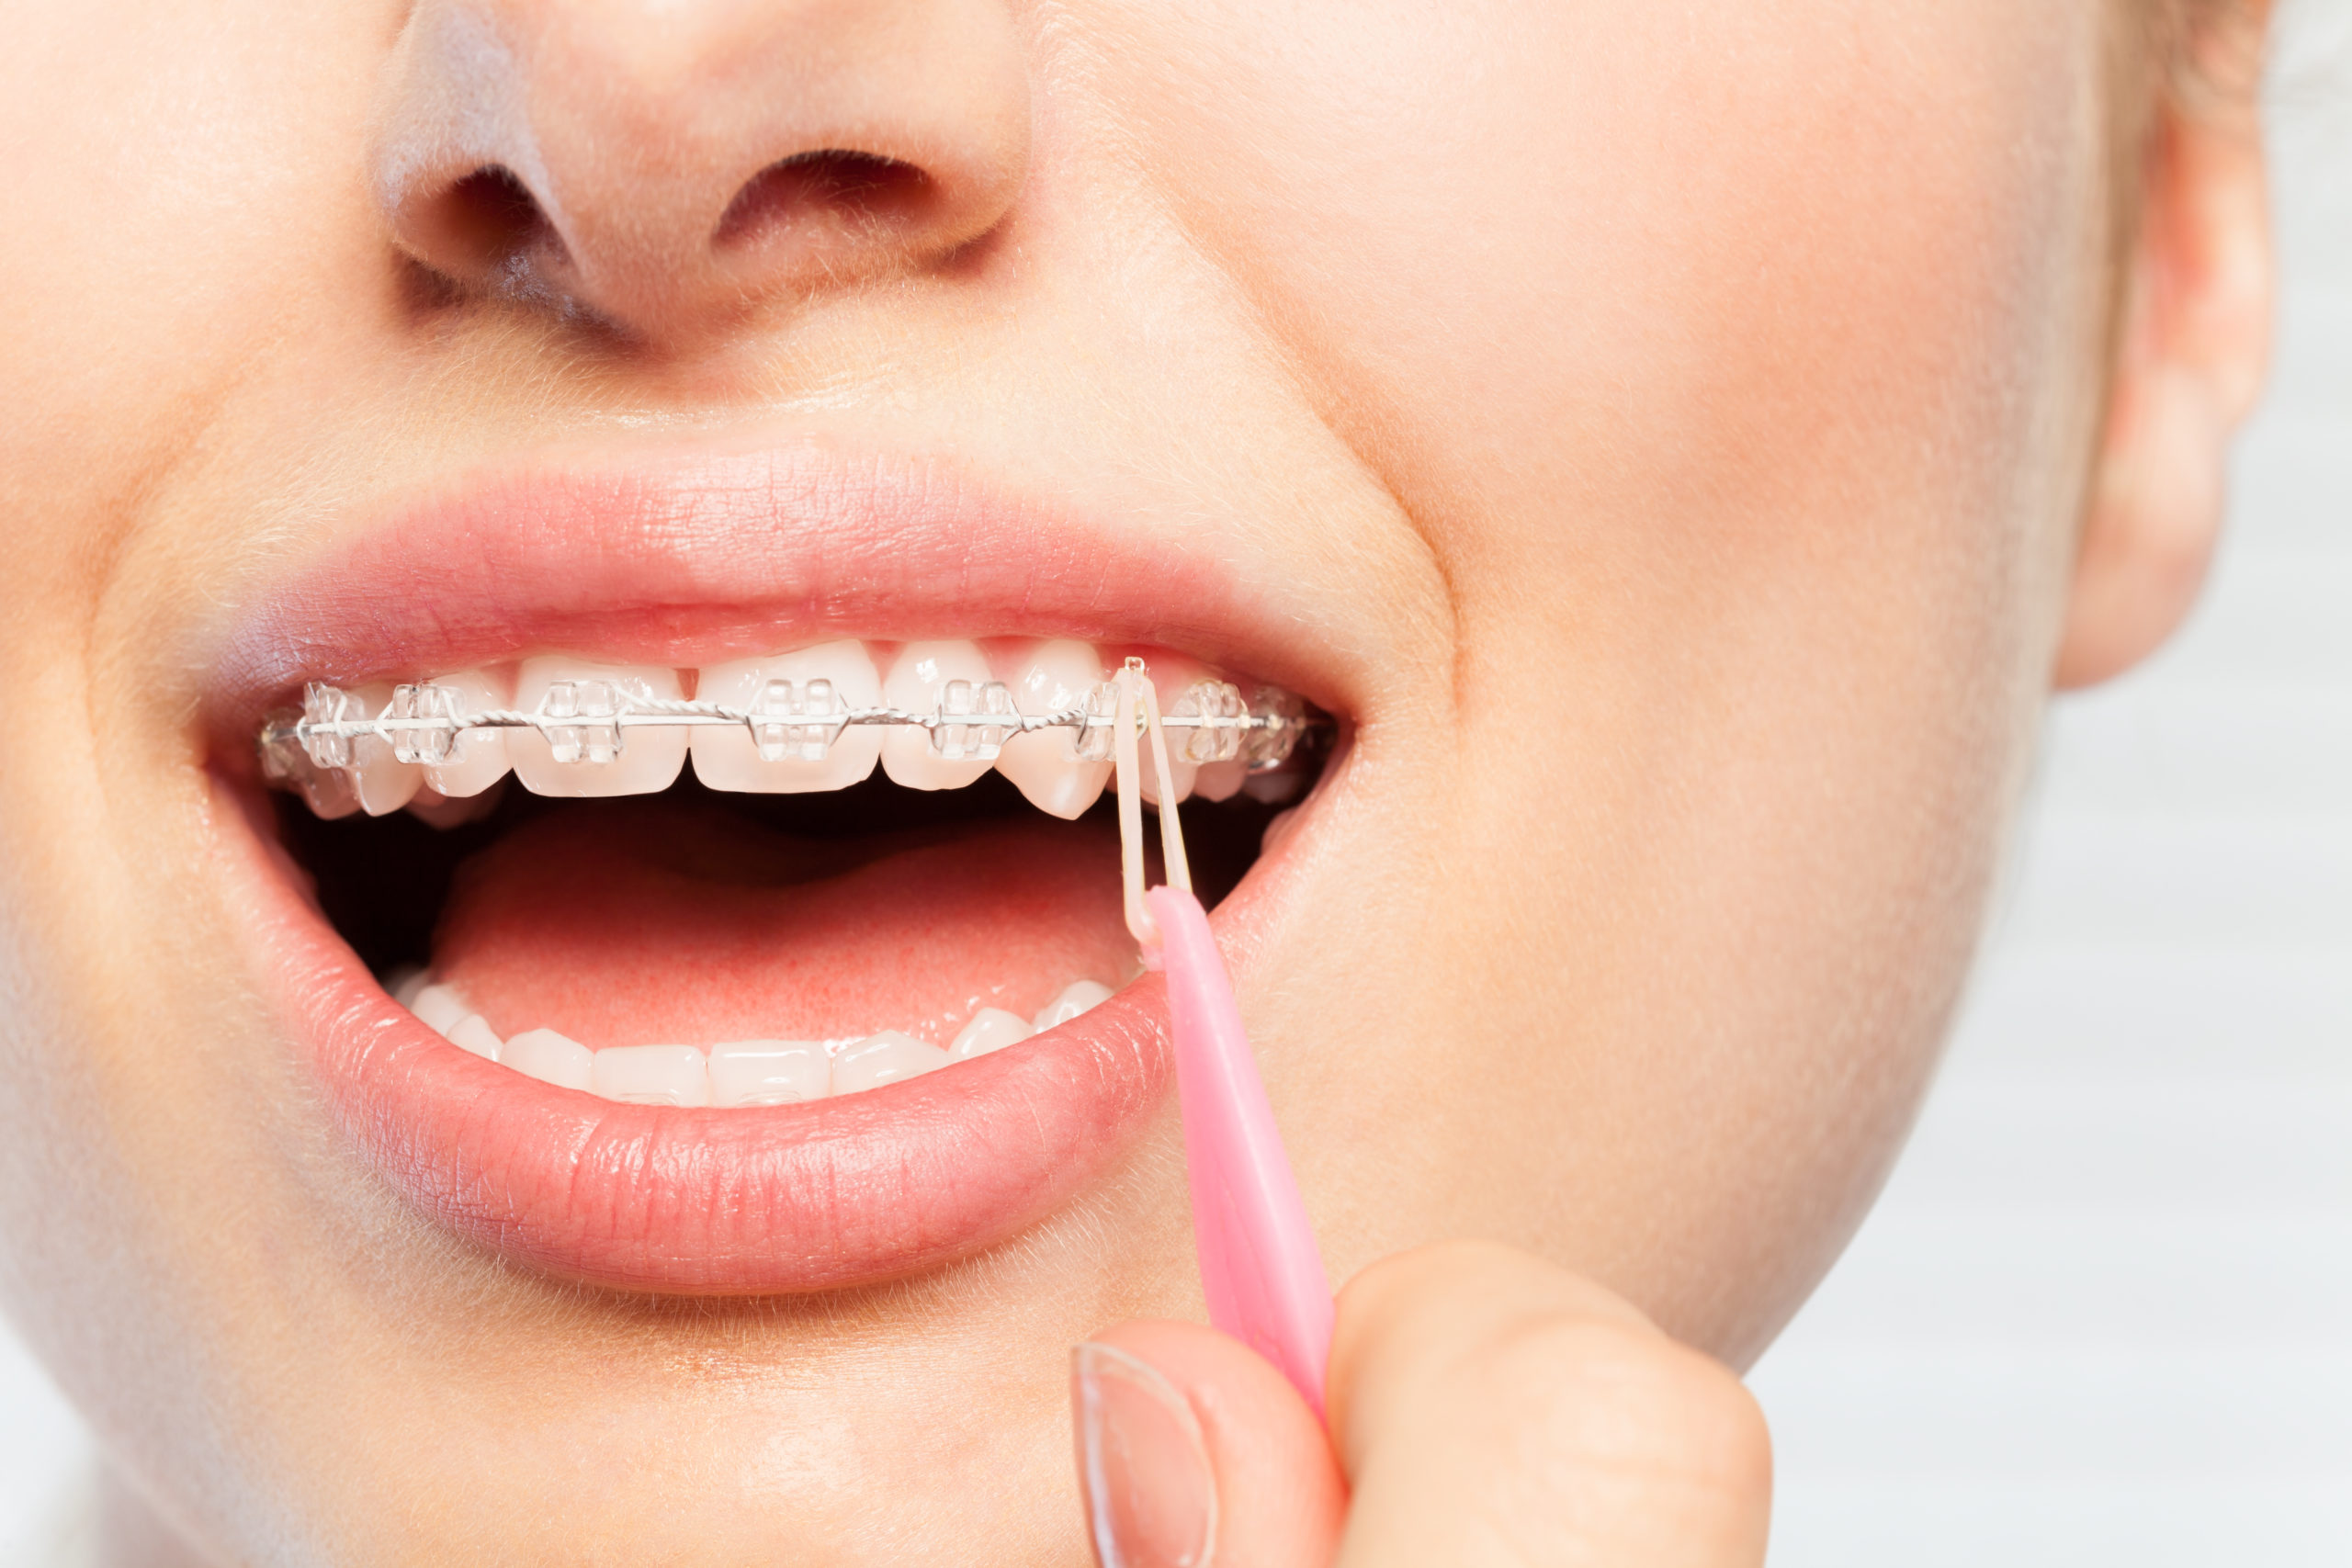 How important is wearing rubber bands with braces?